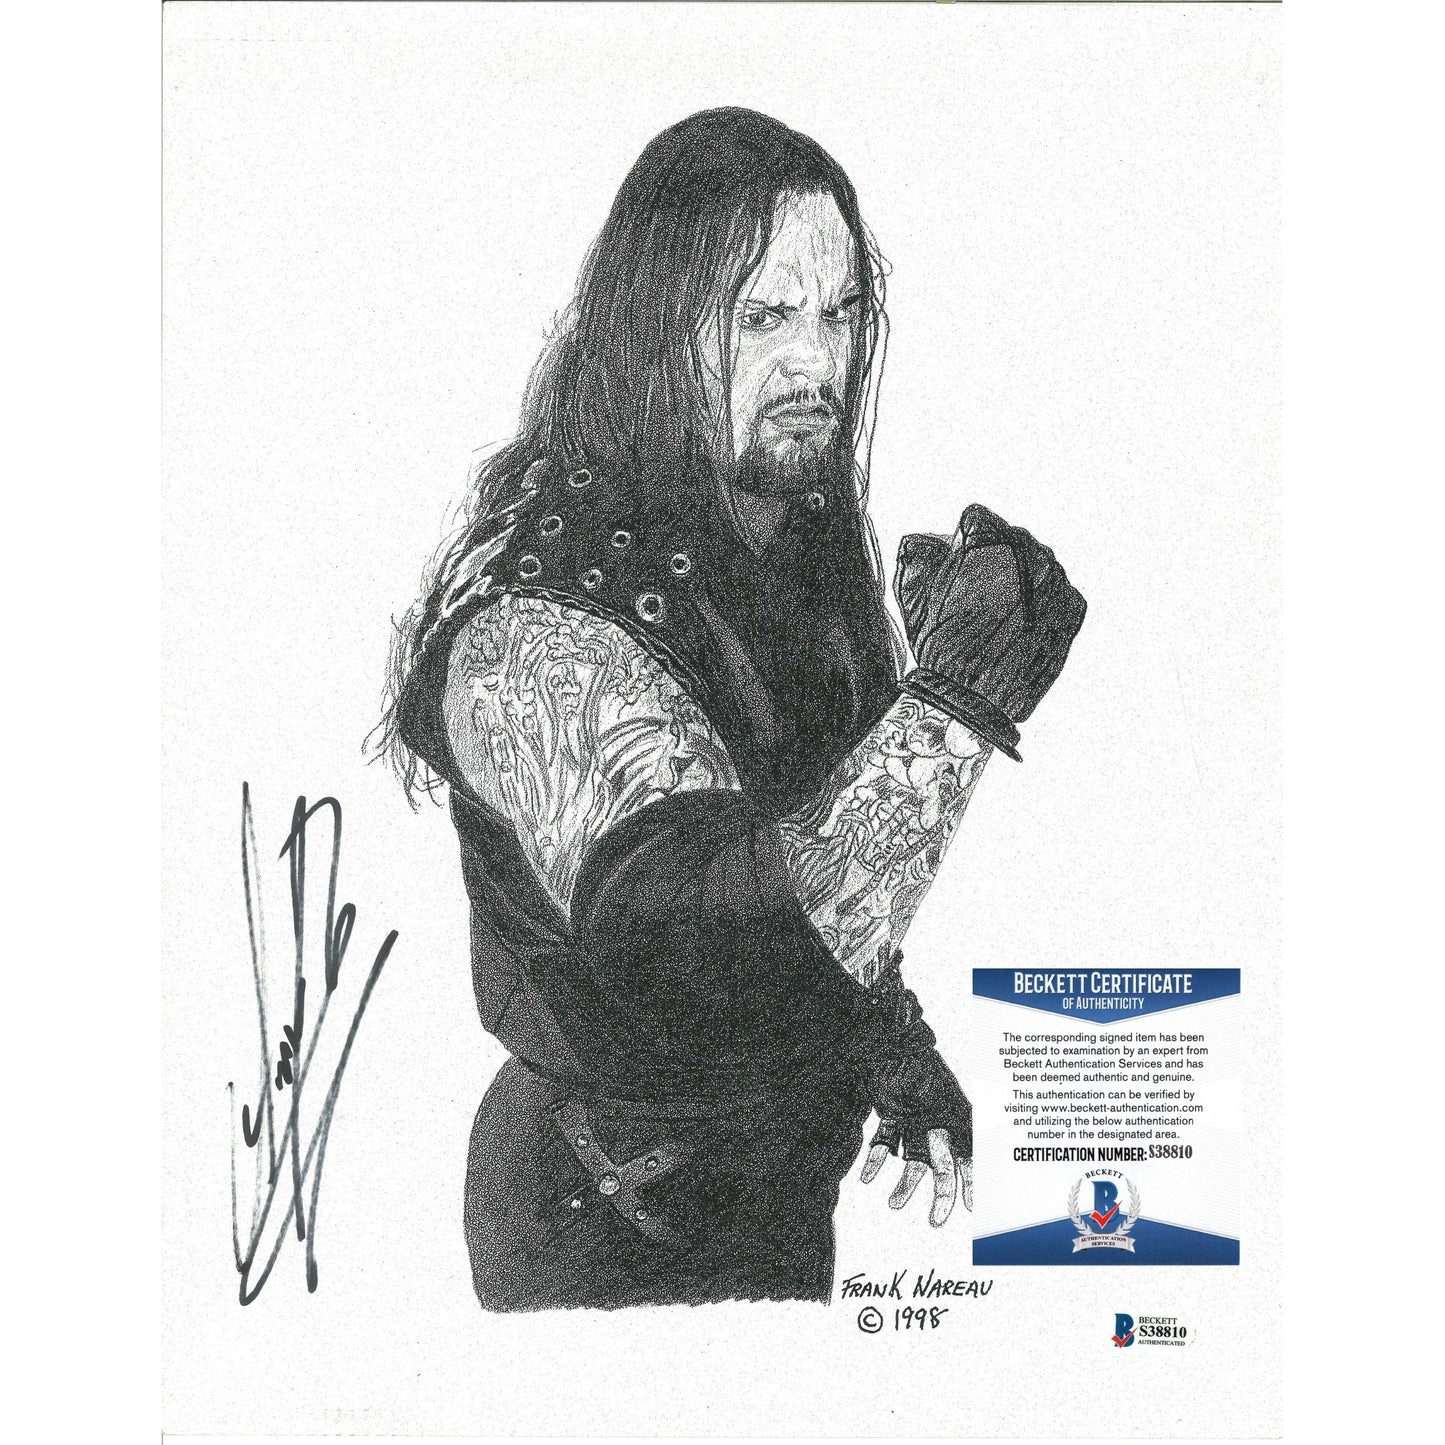 WWE- Autographed- The Undertaker Signed Frank Nareau 11x14 Inch Artwork Print Beckett Certified Authentic 101